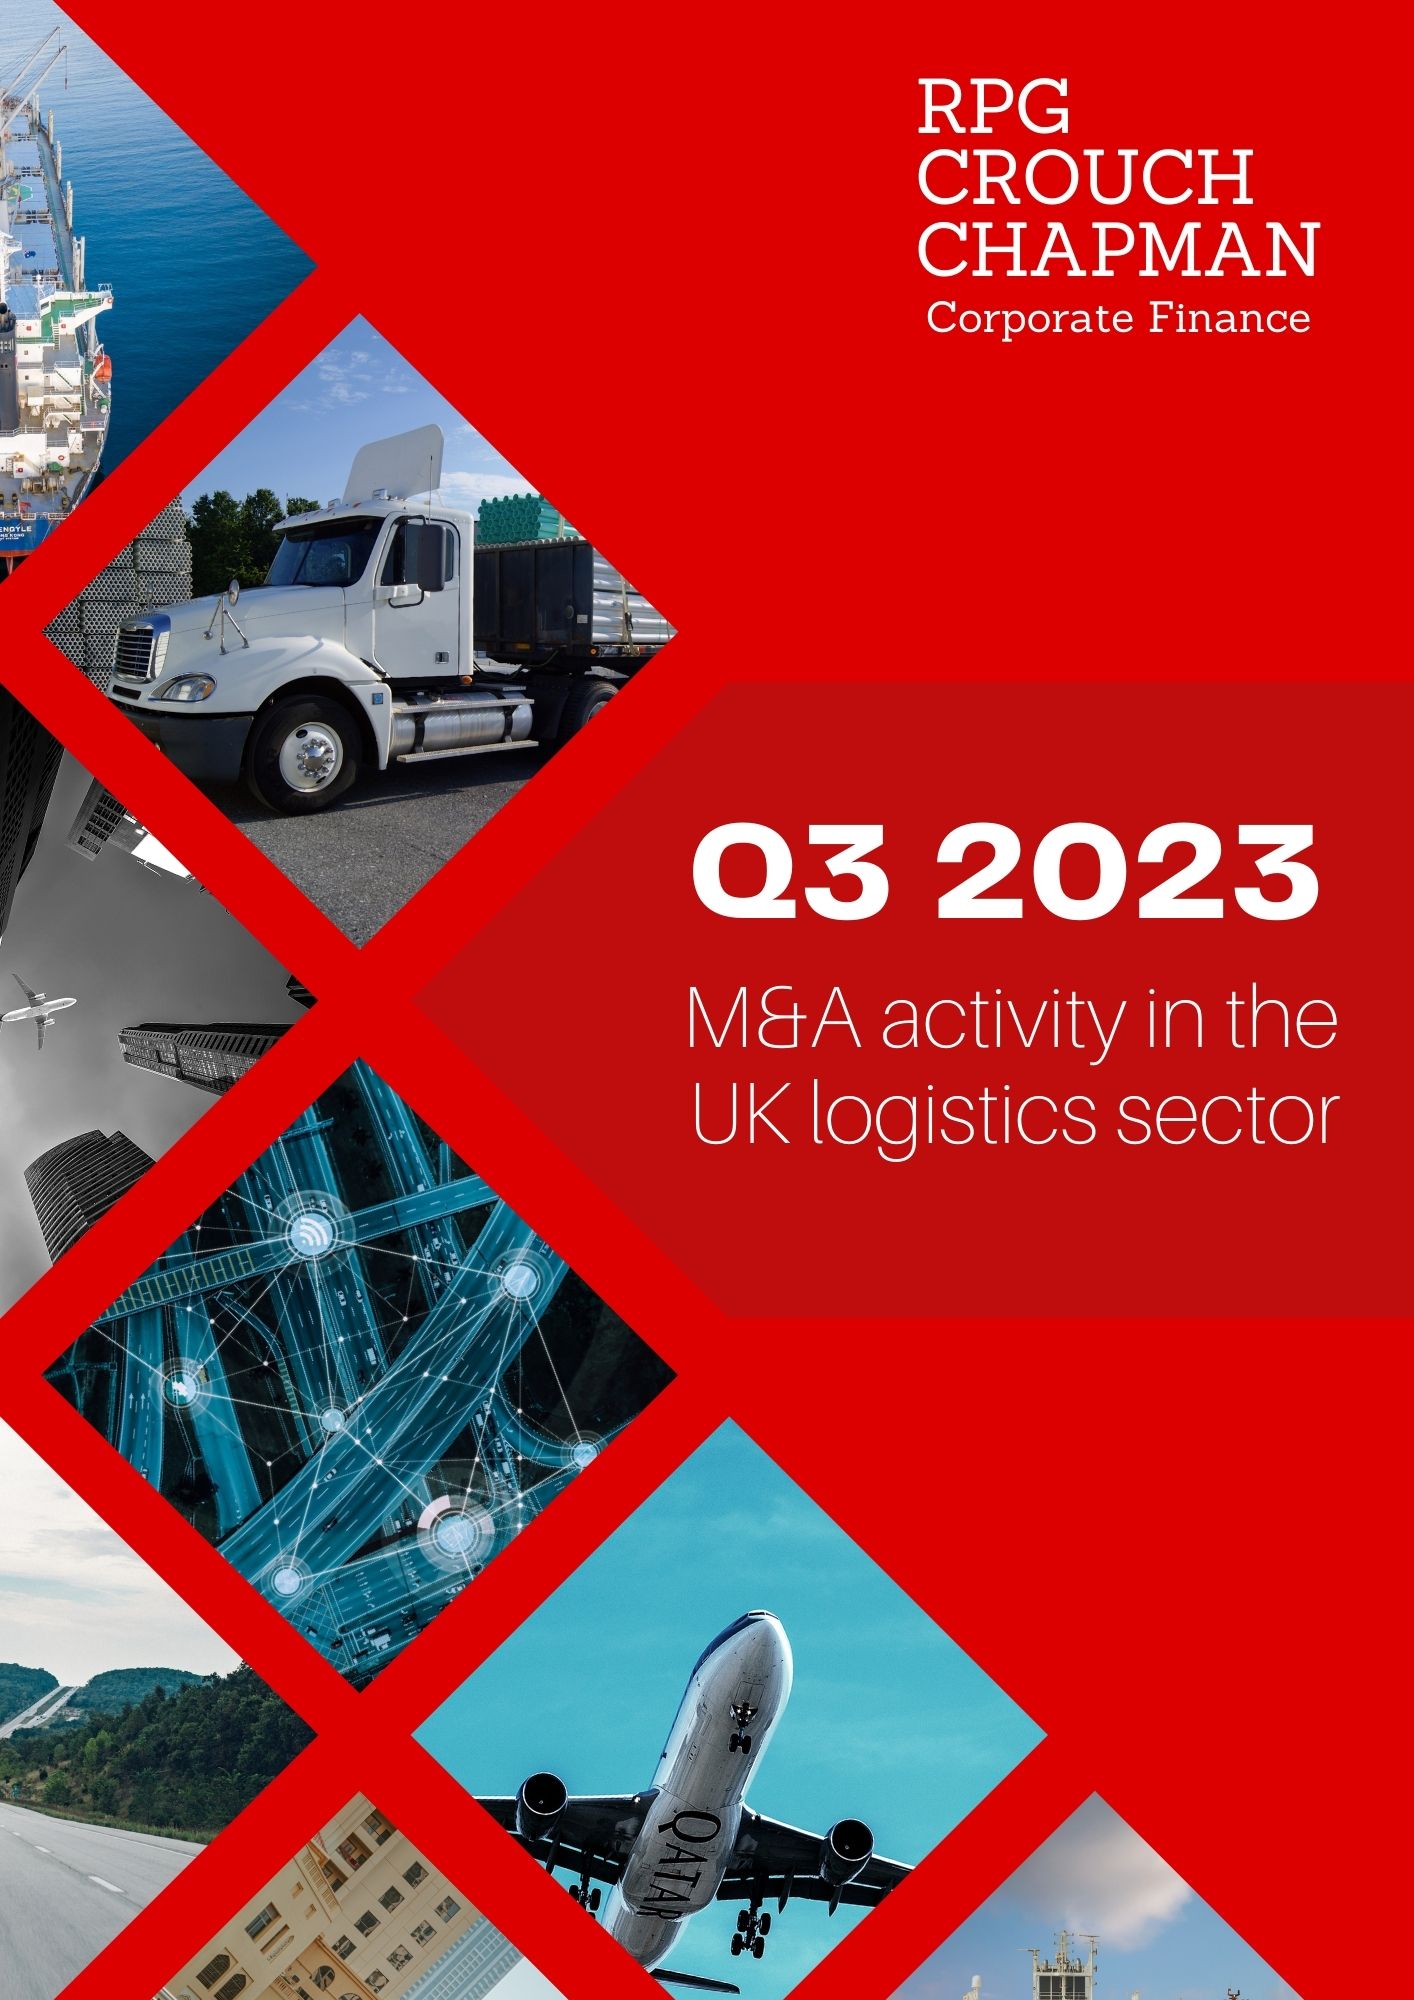 Q3 2023 M&A activity in the UK logistics sector